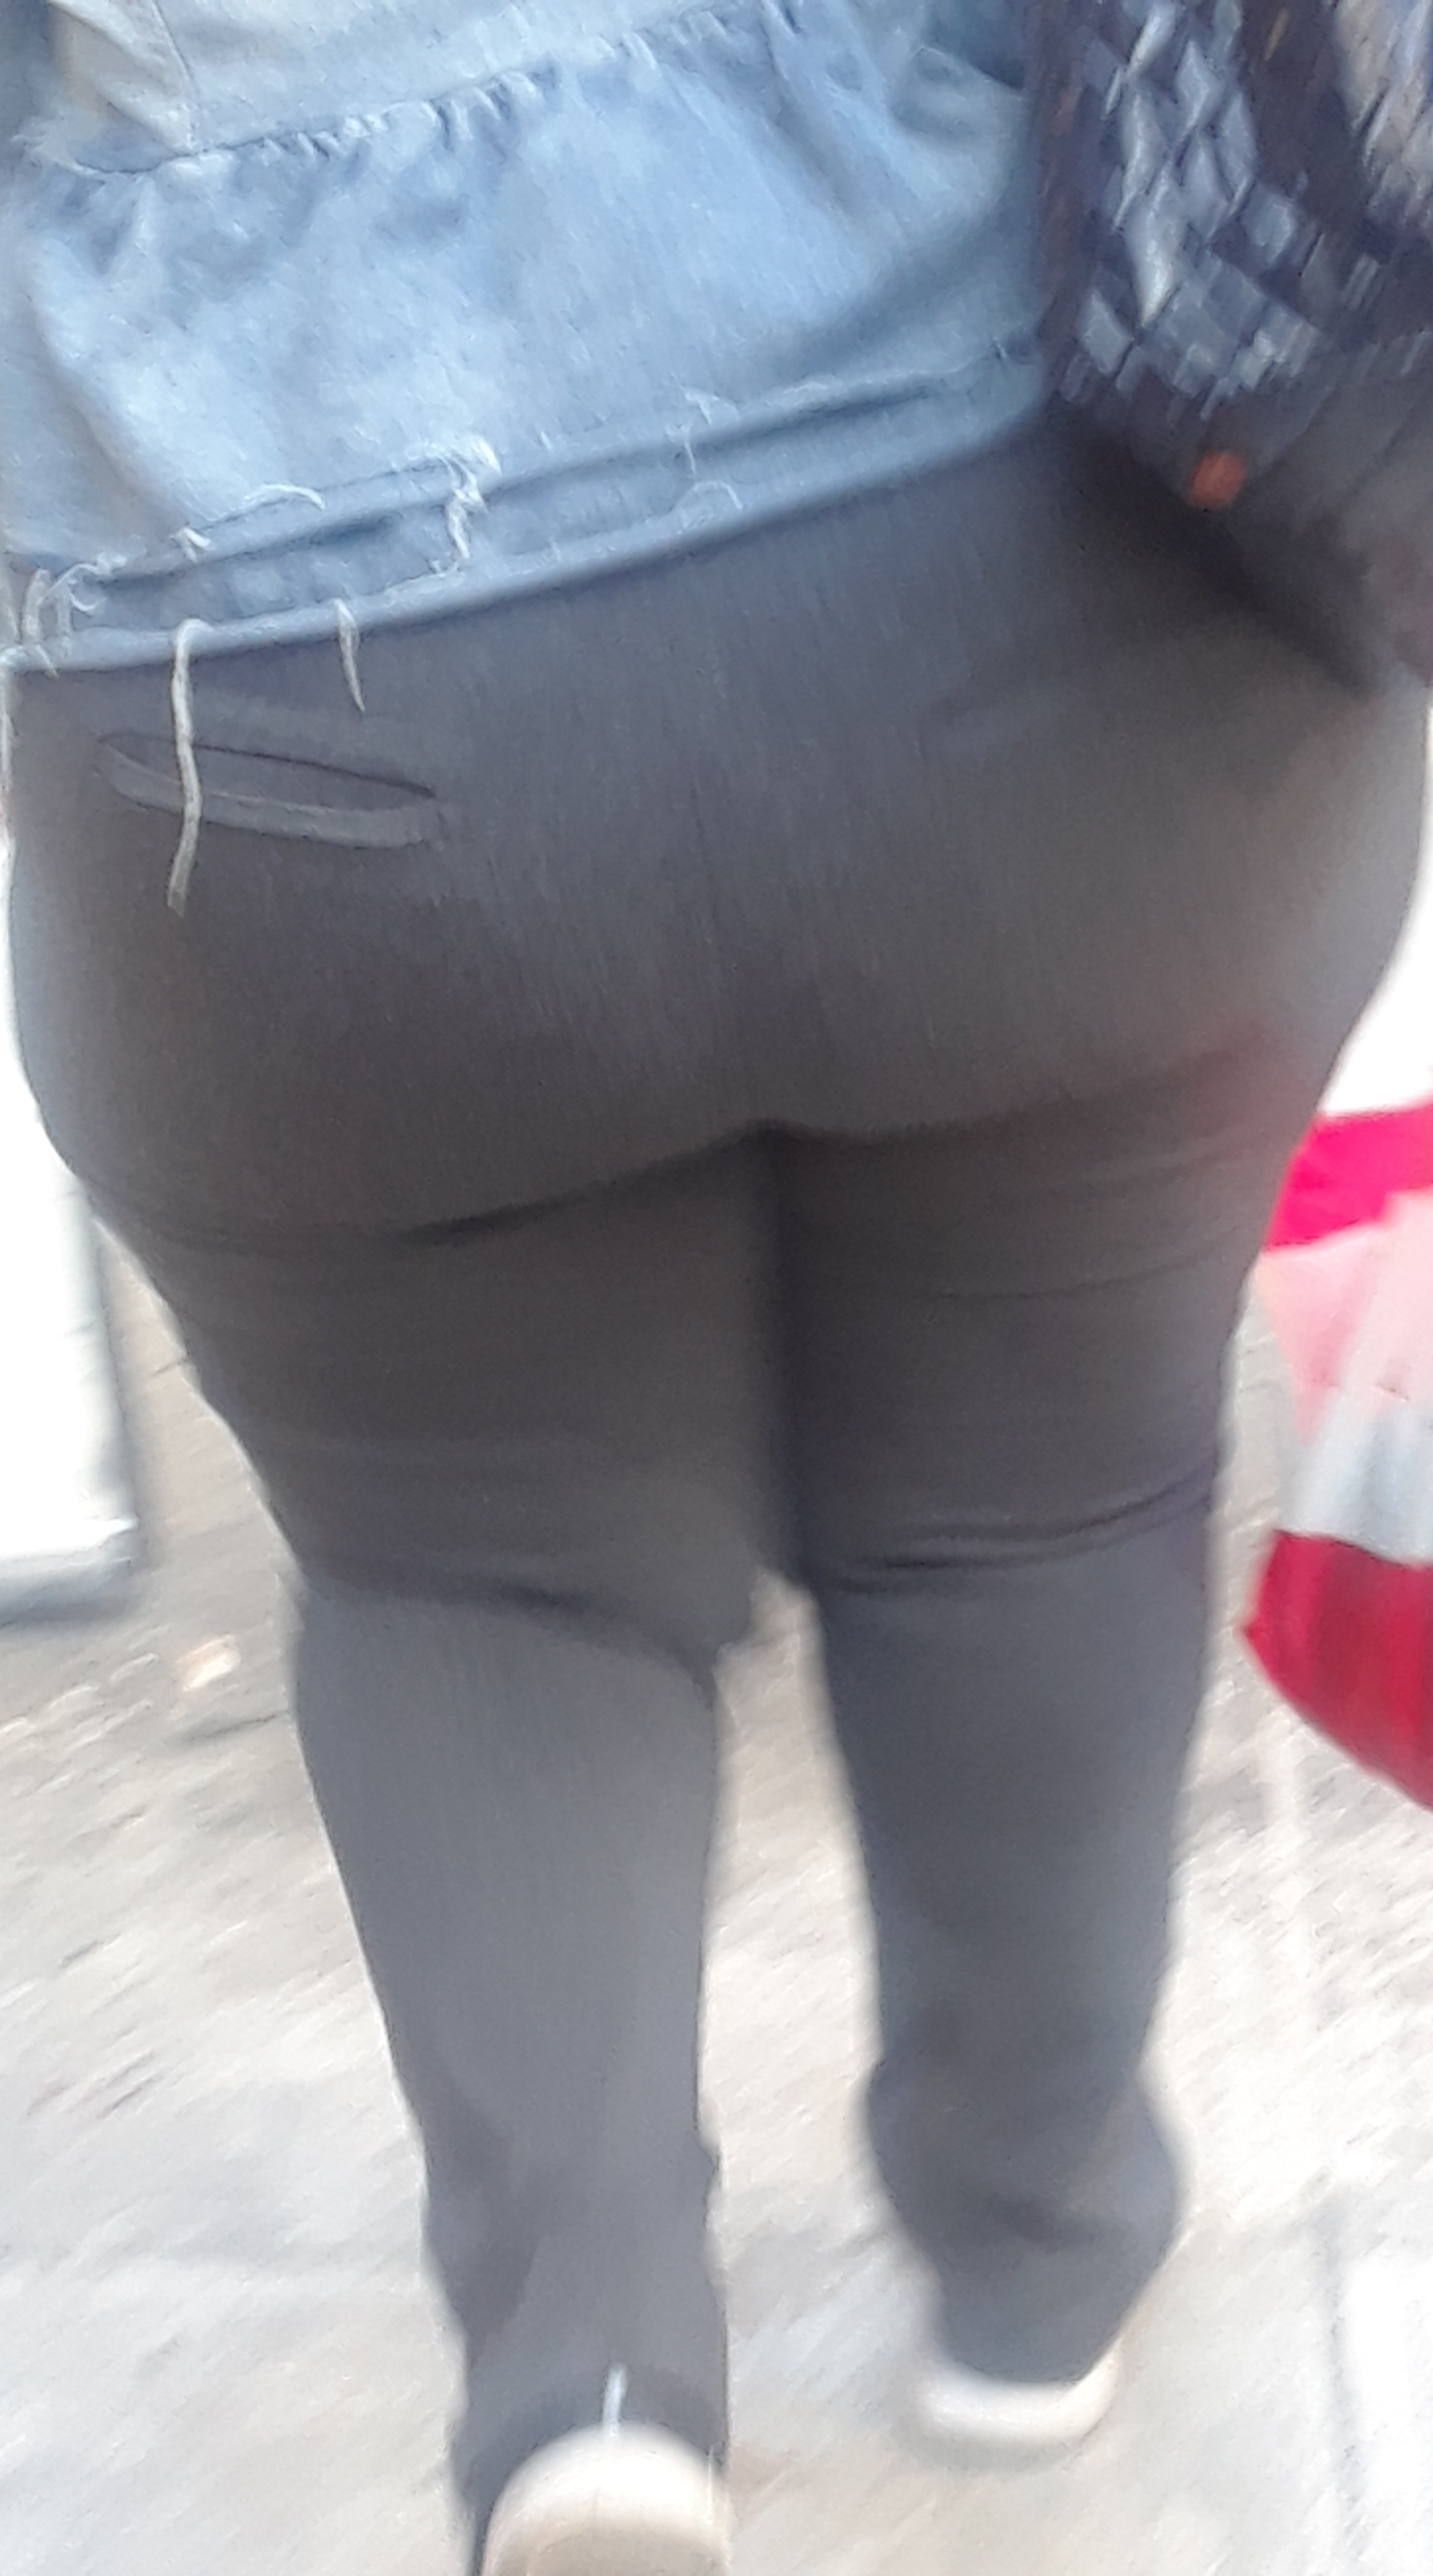 Best Booty Ive seen so image